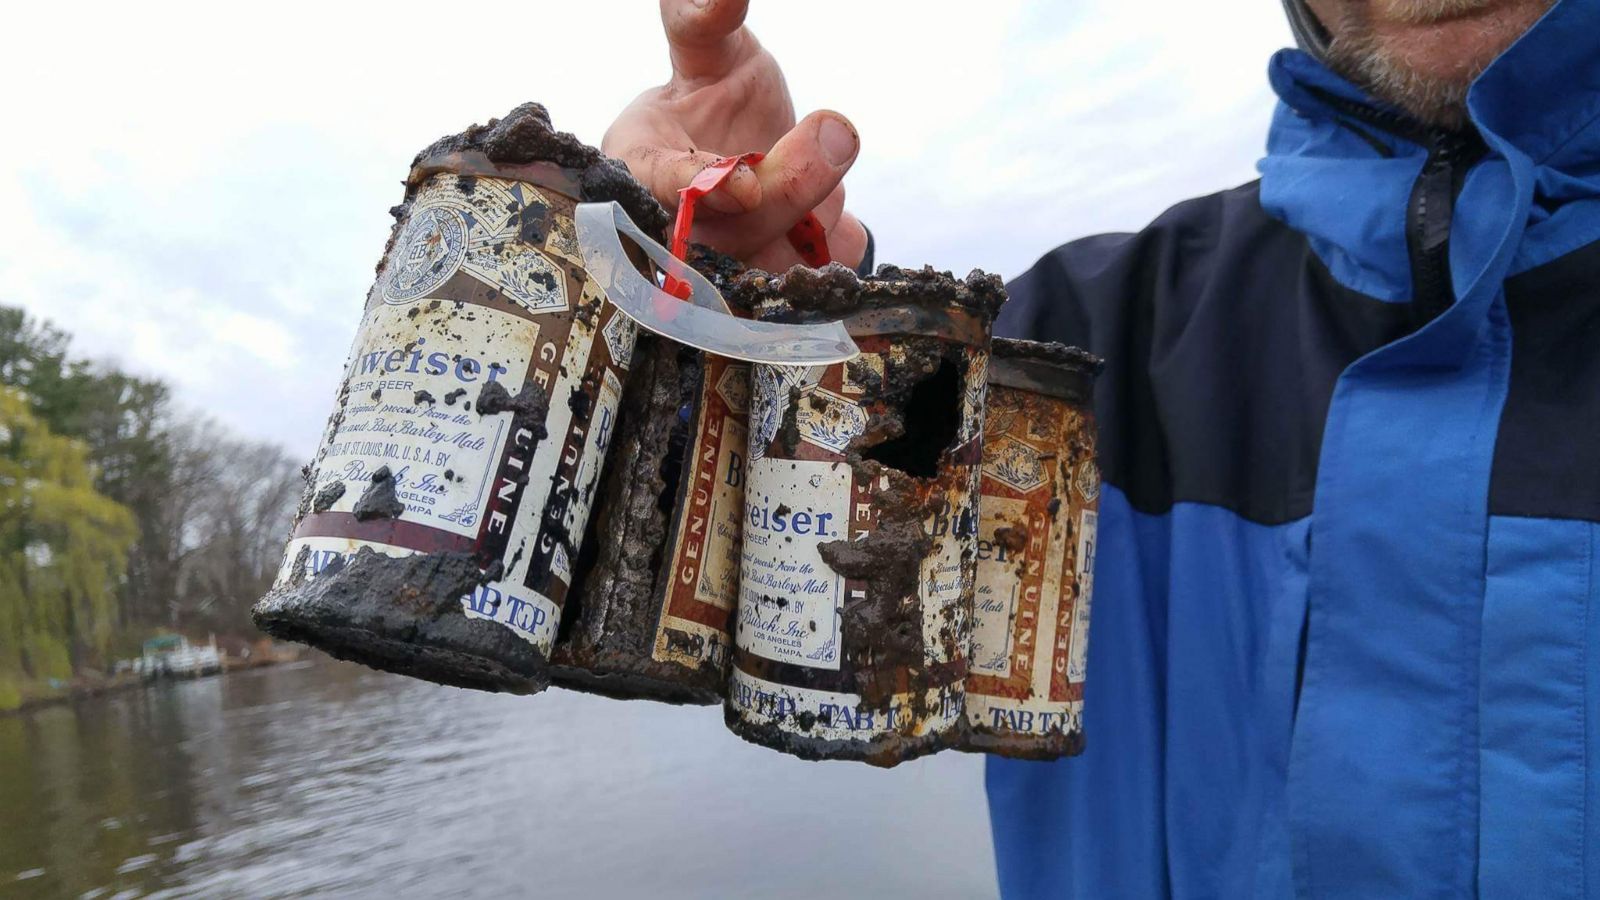 Wisconsin Fishing Buds Reel in 60-Year-Old 6-Pack of Beer - ABC News